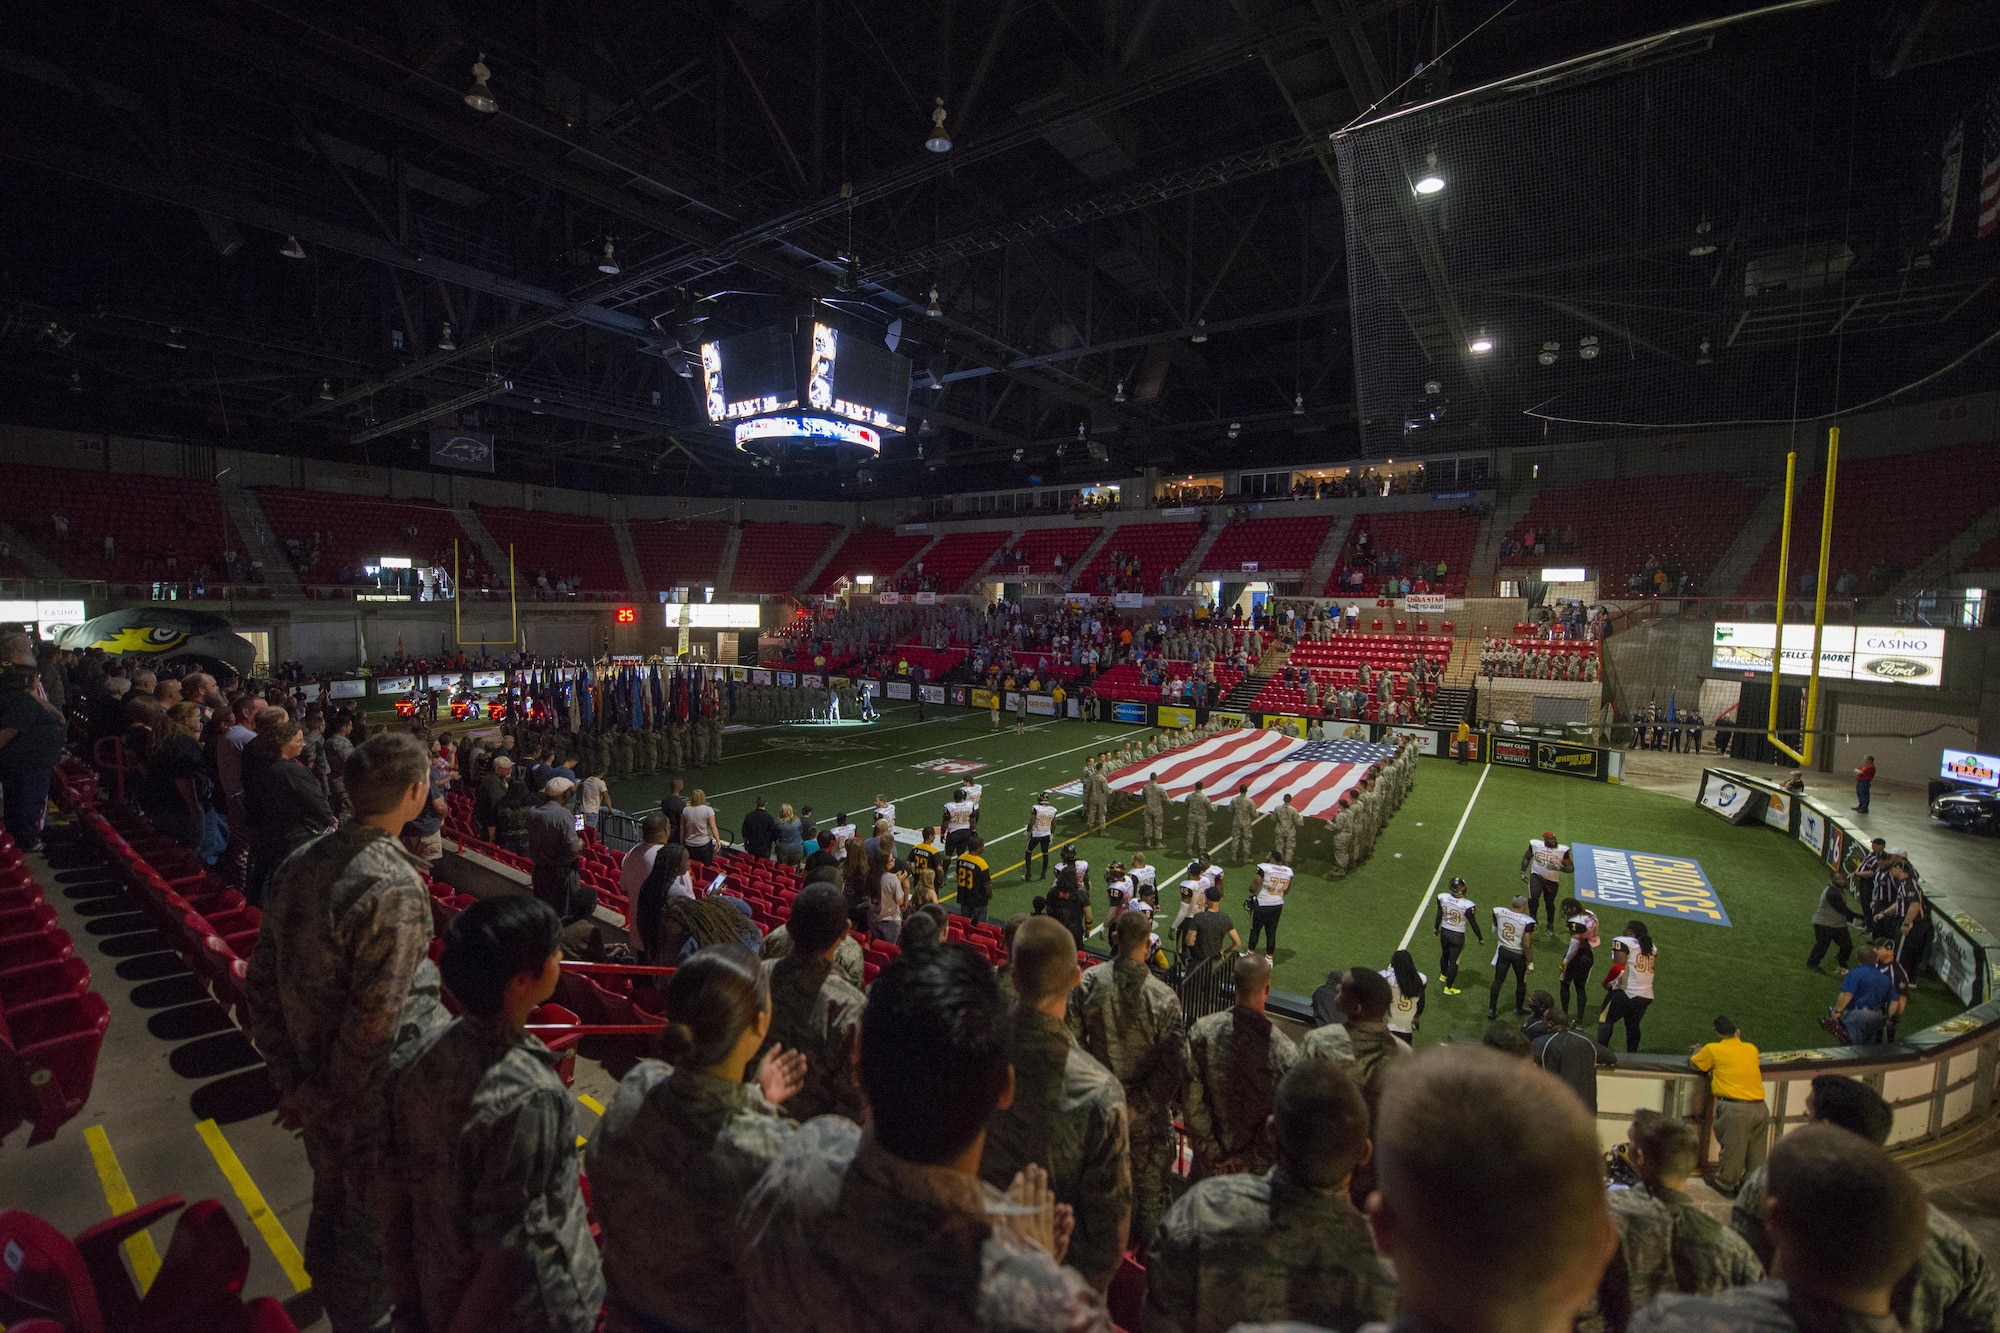 Airmen from Sheppard Air Force Base, Texas, participate as spectators, flag bearers, and demonstration squadrons for the Nighthawks military appreciation football game at the Kay Yeager Coliseum in downtown Wichita Falls, Texas, May 20, 2017. The game was close, but the Nighthawks lost with a final score of 47 to 50 against the Iowa Barnstormers. (U.S. Air Force photo by 2nd Lt. Jacqueline Jastrzebski)